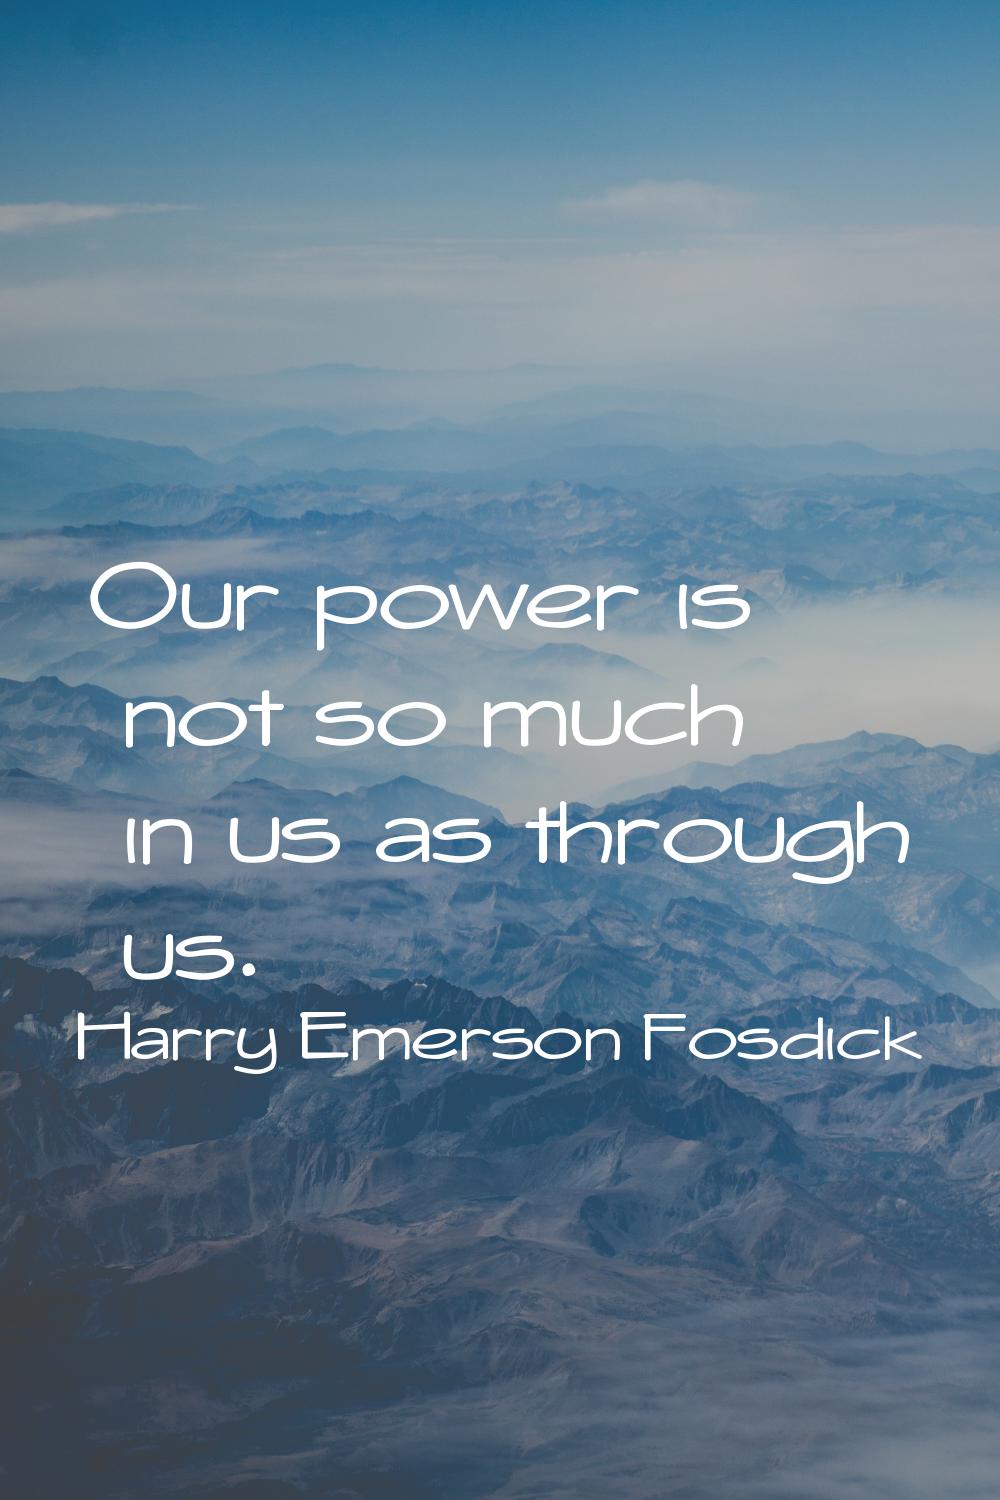 Our power is not so much in us as through us.